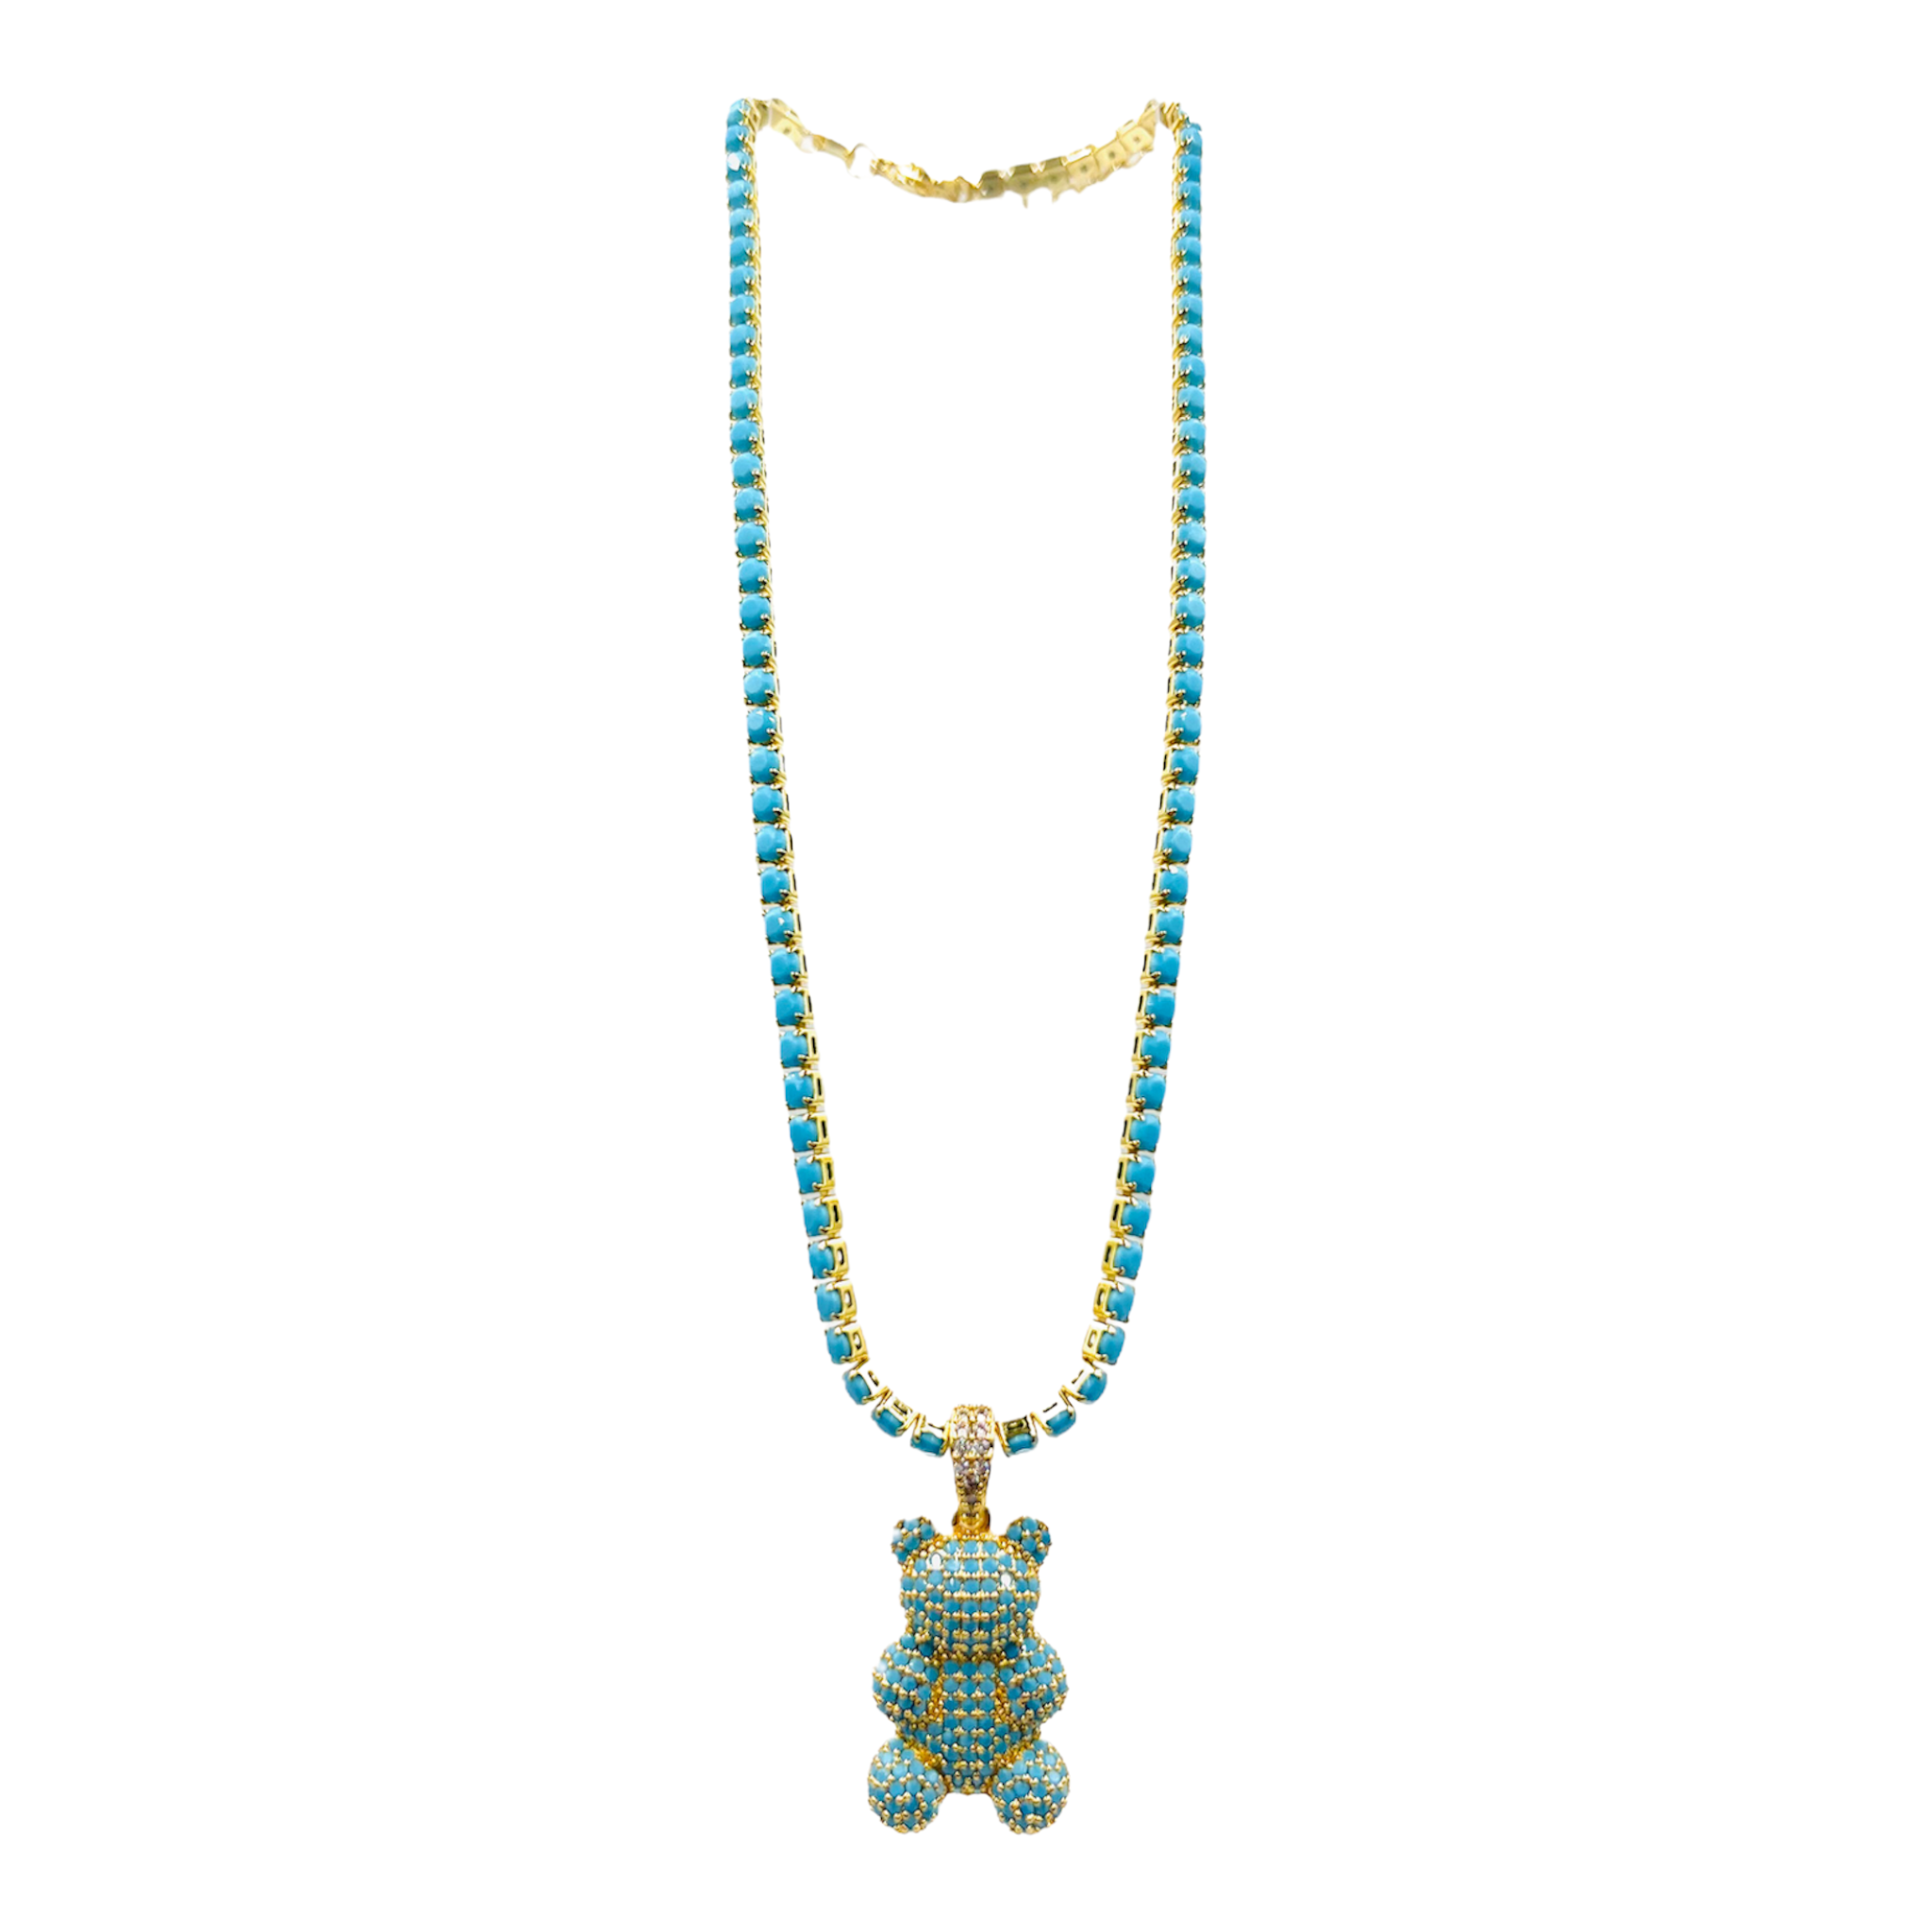 NECKLACE TENNIS BEAR TURQUOISE